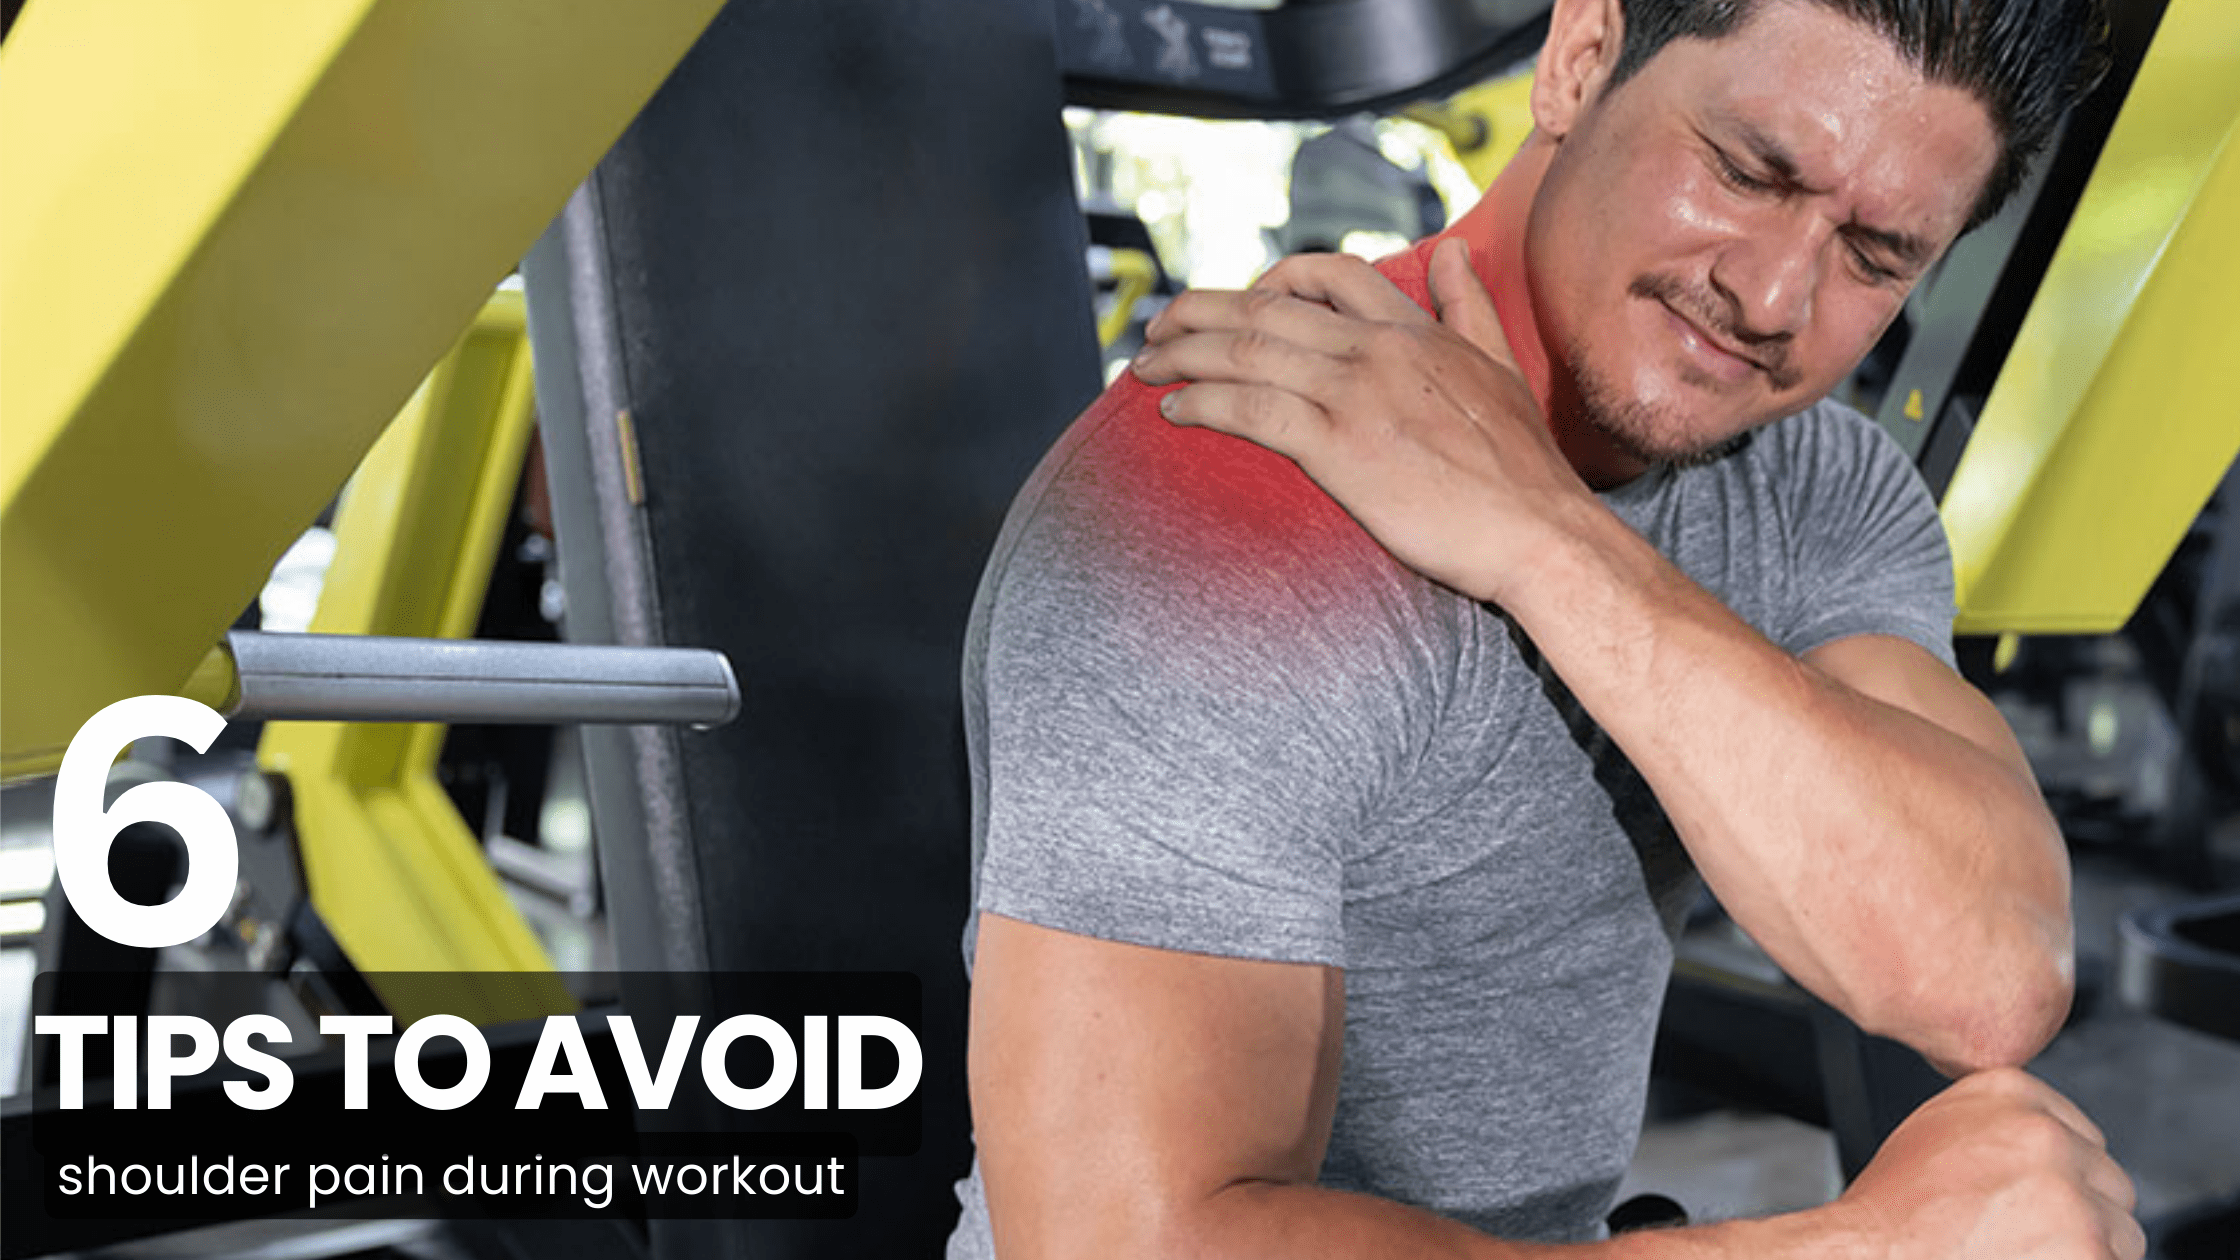 Seven Crucial Exercises & Stretches to Maximize Your Shoulder